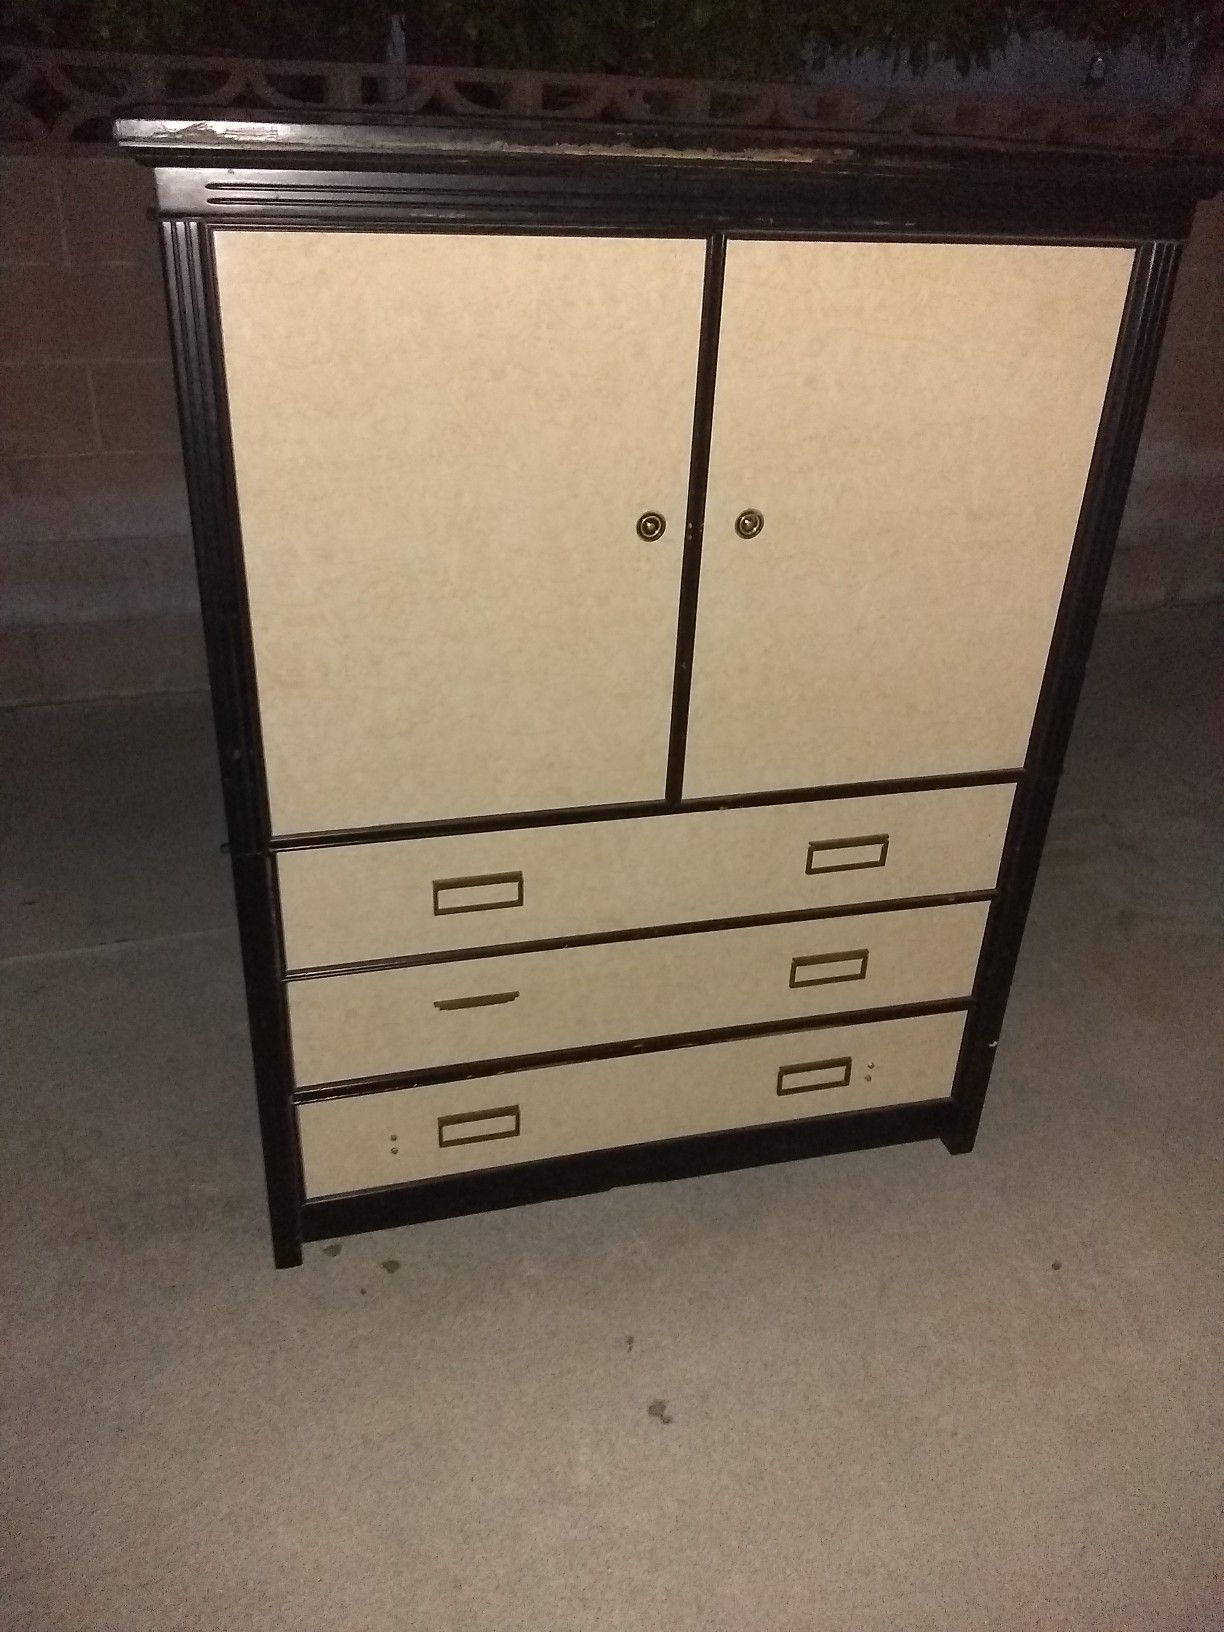 Free TV stand /dresser 1st come 1st serve. No holds. I Will delete post when it's gone